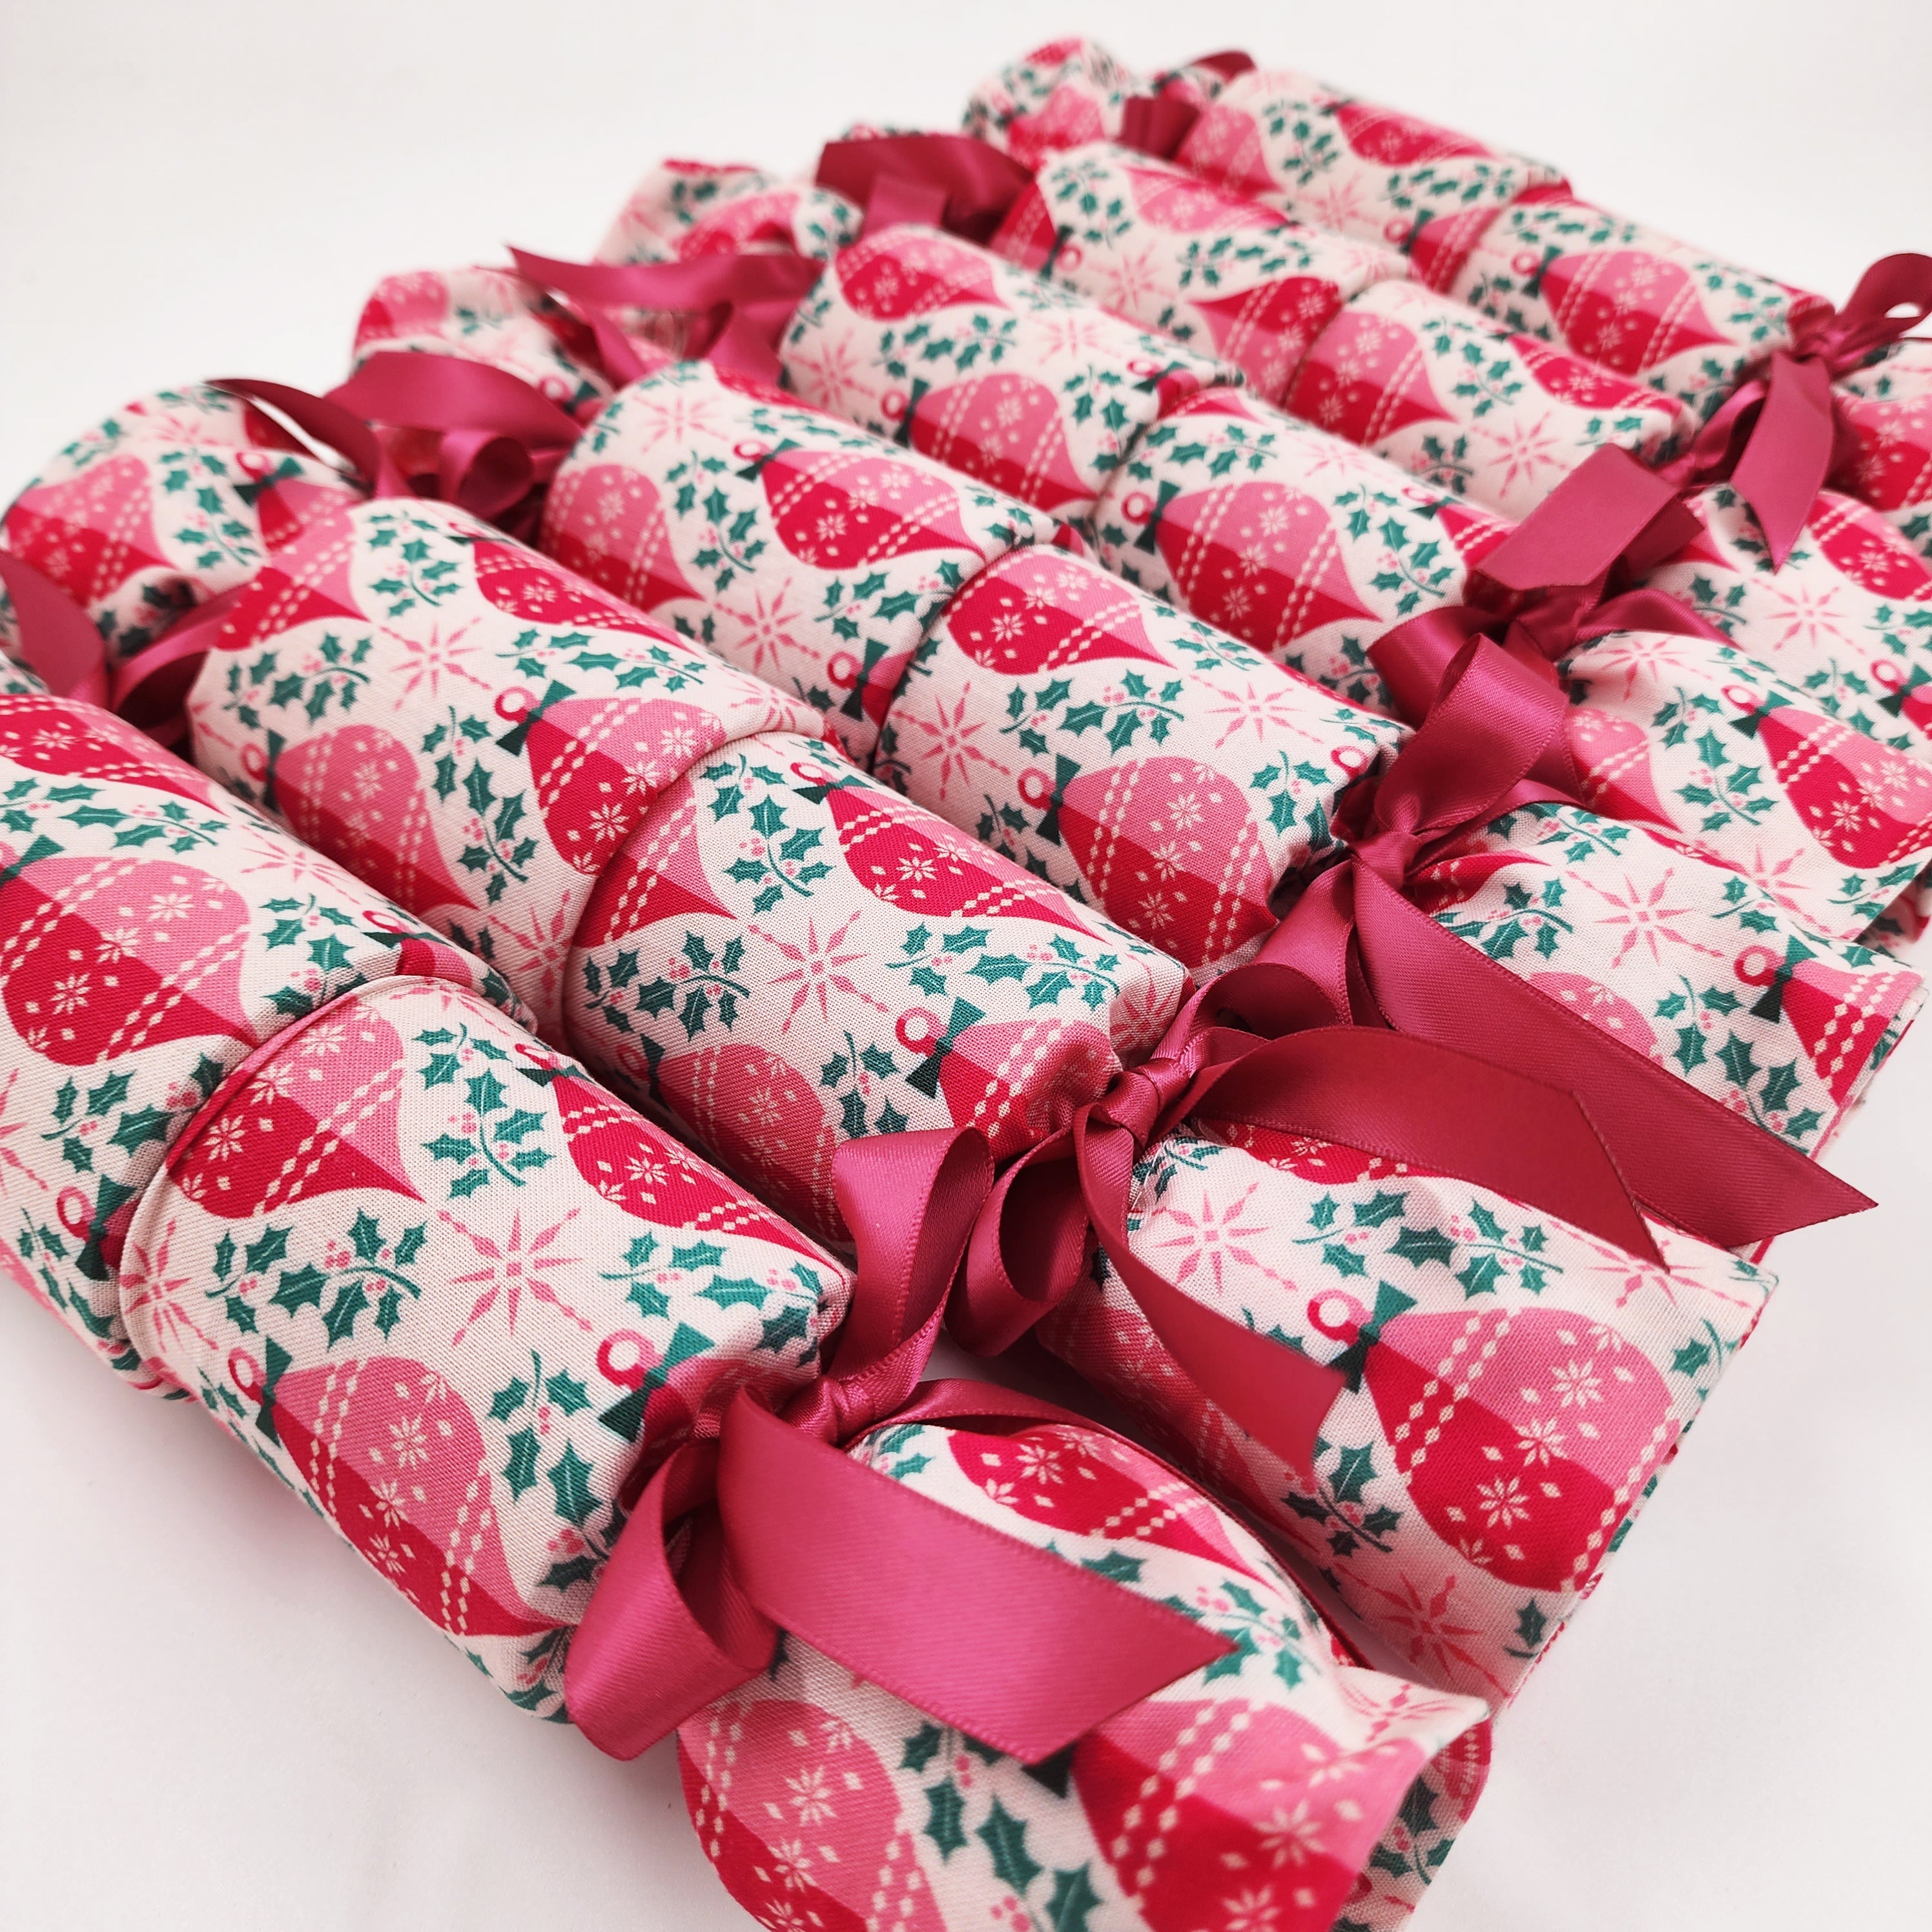 Pink Baubles (Reusable Christmas Crackers)